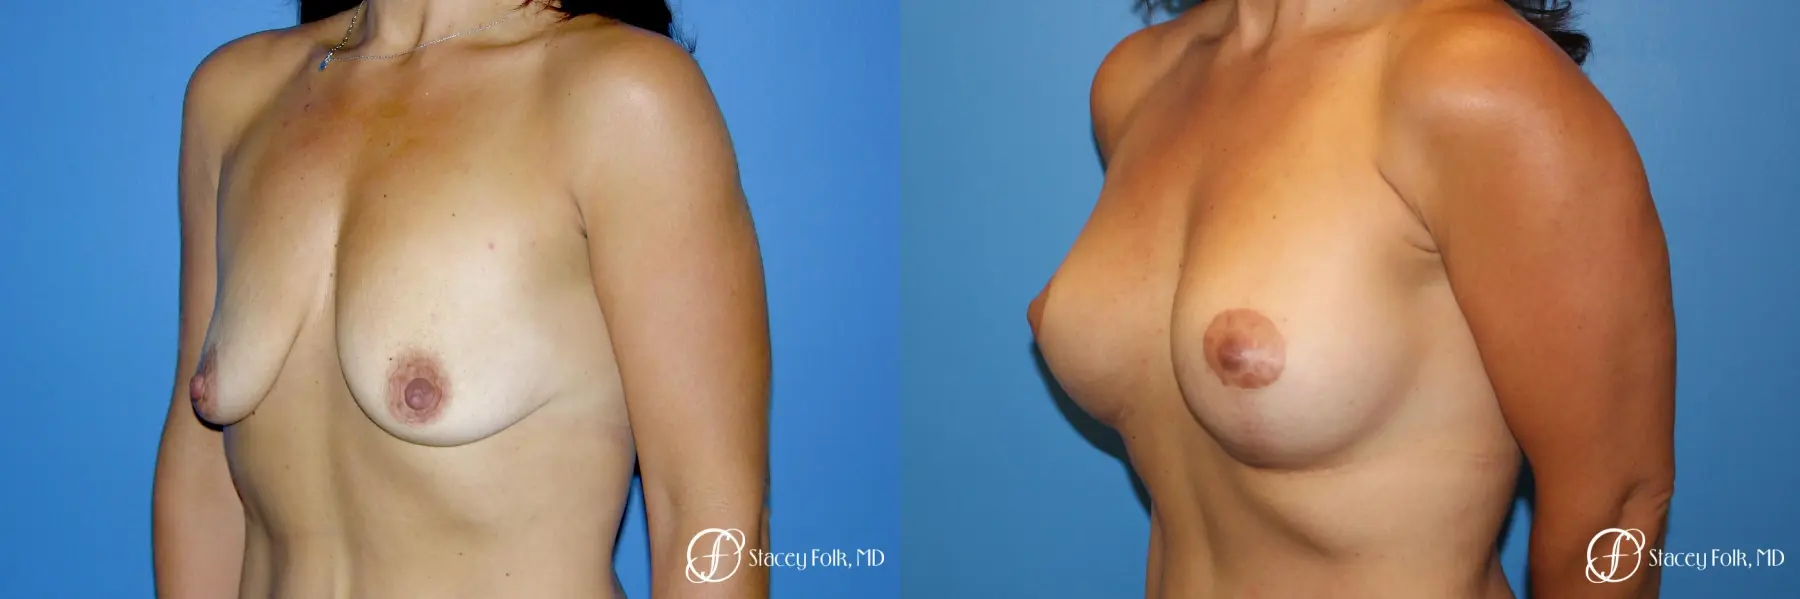 Denver Breast Augmentation Mastopexy 5366 - Before and After 2